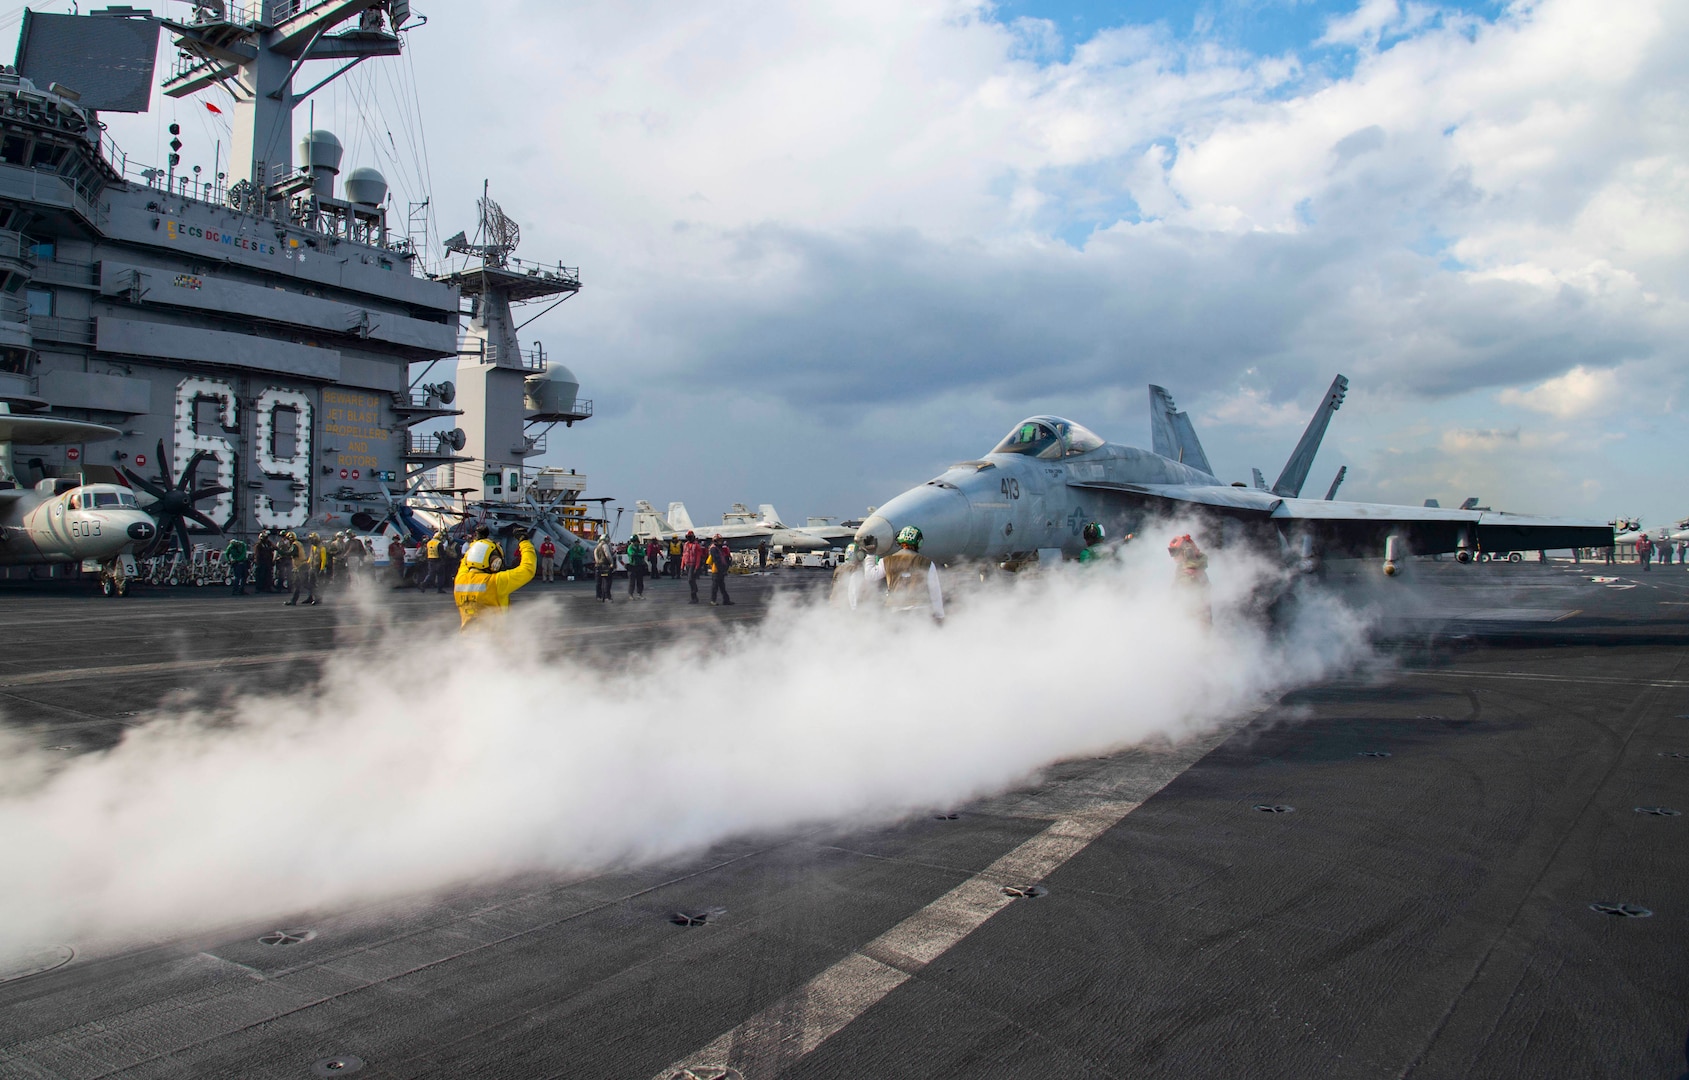 161206-N-QI061-513
MEDITERRANEAN SEA (Dec. 6, 2016) An F/A-18E Super Hornet assigned to the Gunslingers of Strike Fighter Squadron (VFA) 105 prepares to launch from the flight deck of the aircraft carrier USS Dwight D. Eisenhower (CVN 69) in support of Operation Inherent Resolve (OIR). The ship is deployed as part of the Eisenhower Carrier Strike Group to conduct naval operations in the U.S. 6th Fleet area of operations in support of U.S. national security interests in Europe. (U.S. Navy photo by Petty Officer 3rd Class Nathan T. Beard/Released)